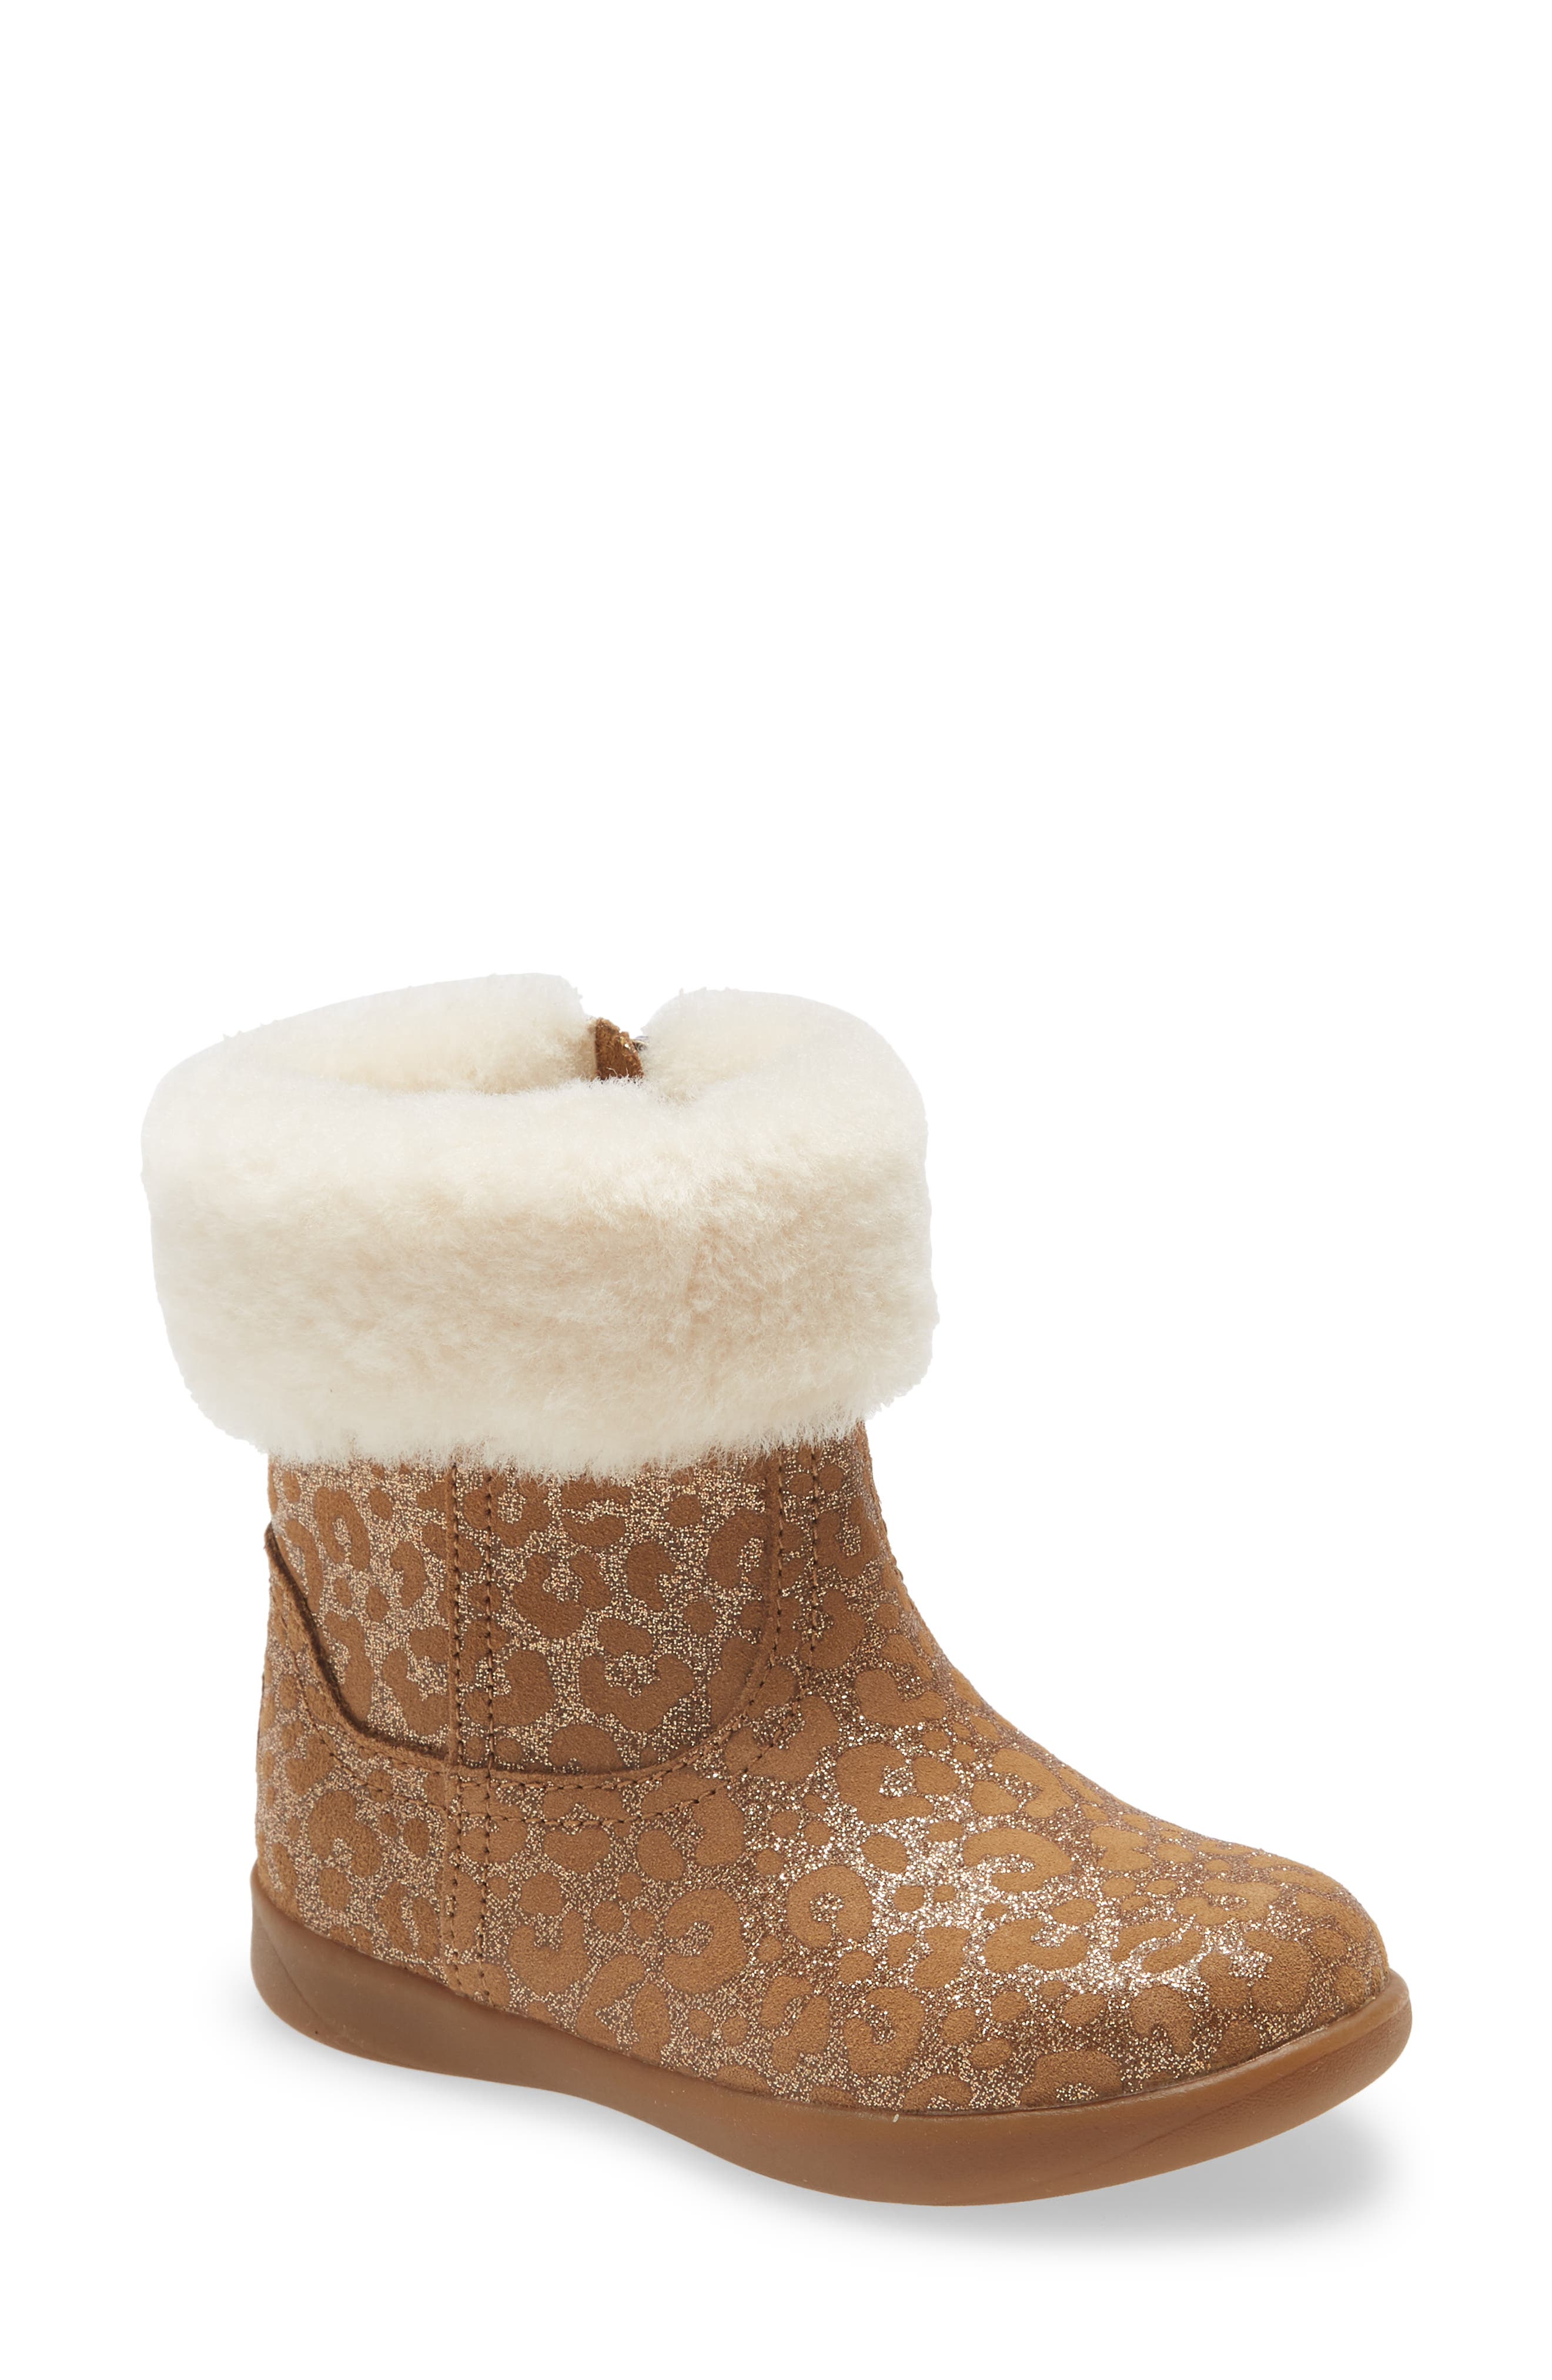 ugg baby boots canada